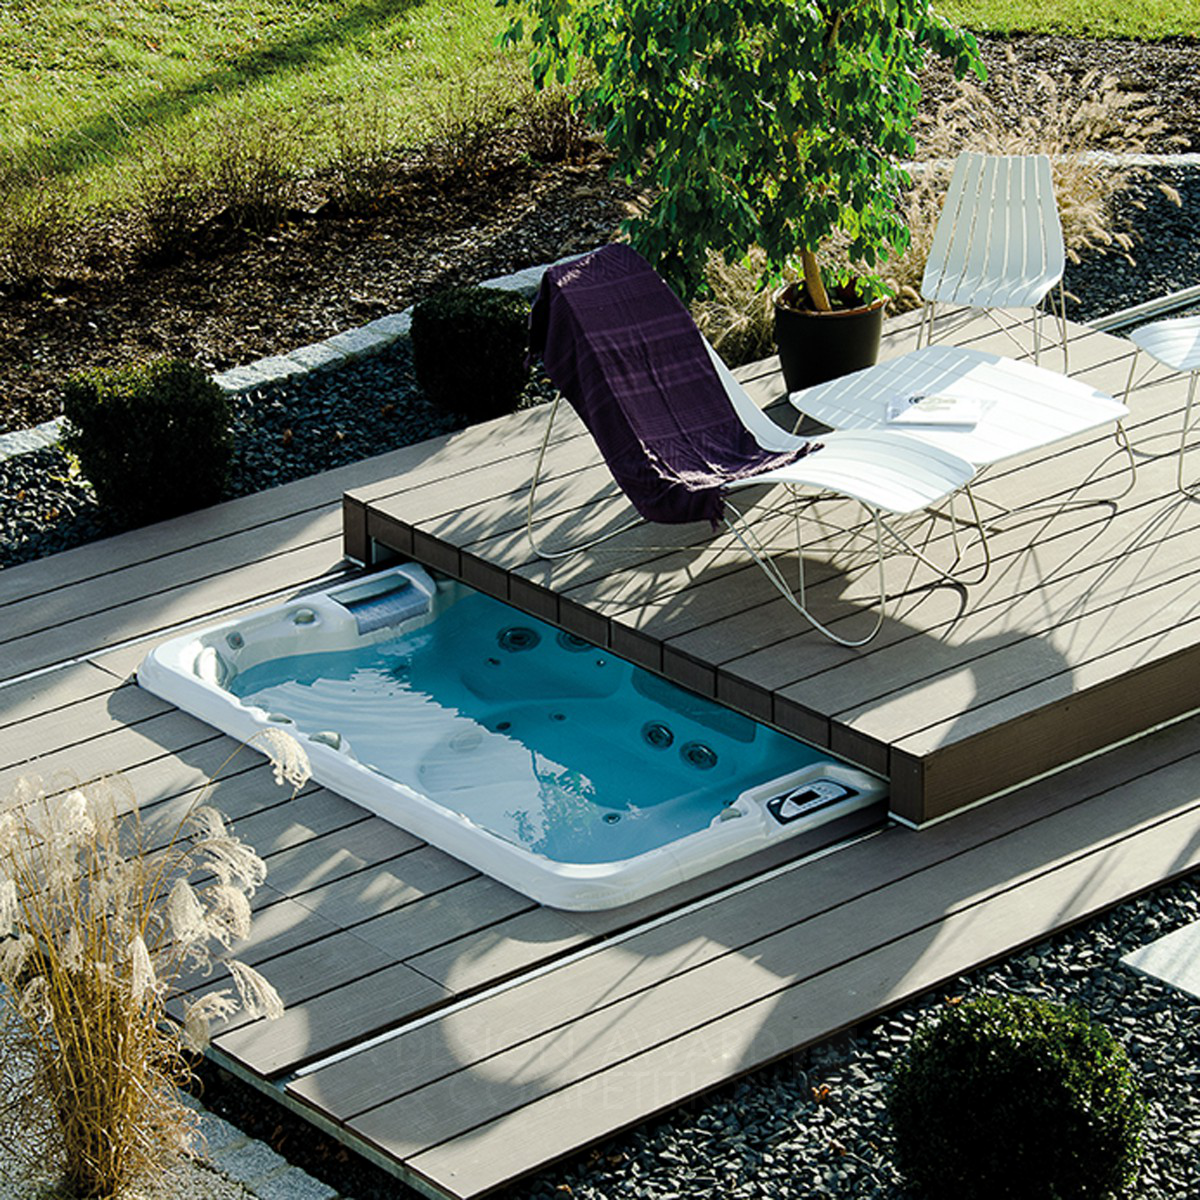 Pool Lounge® Cover For Hot Tubs, Swim Spas and Pools by Armstark GmbH Silver Building Materials and Construction Components Design Award Winner 2016 